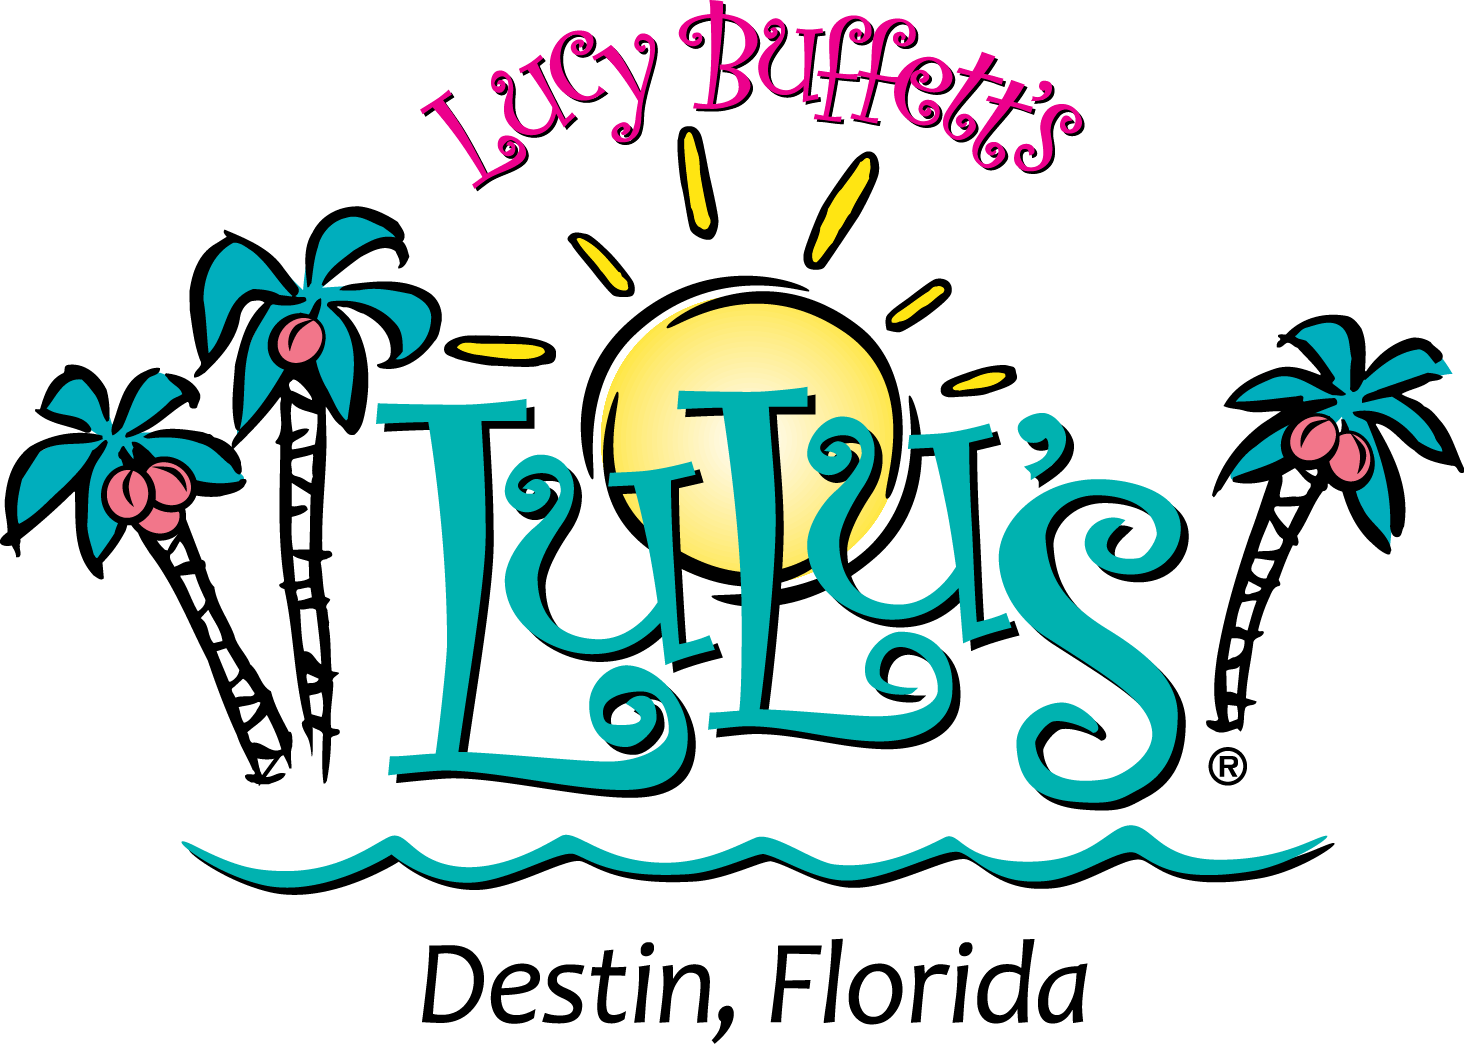 Lulu's, Short For Lucy Buffet , Is A Must-top On Your - Lulu's Gulf Shores Alabama (1464x1044)